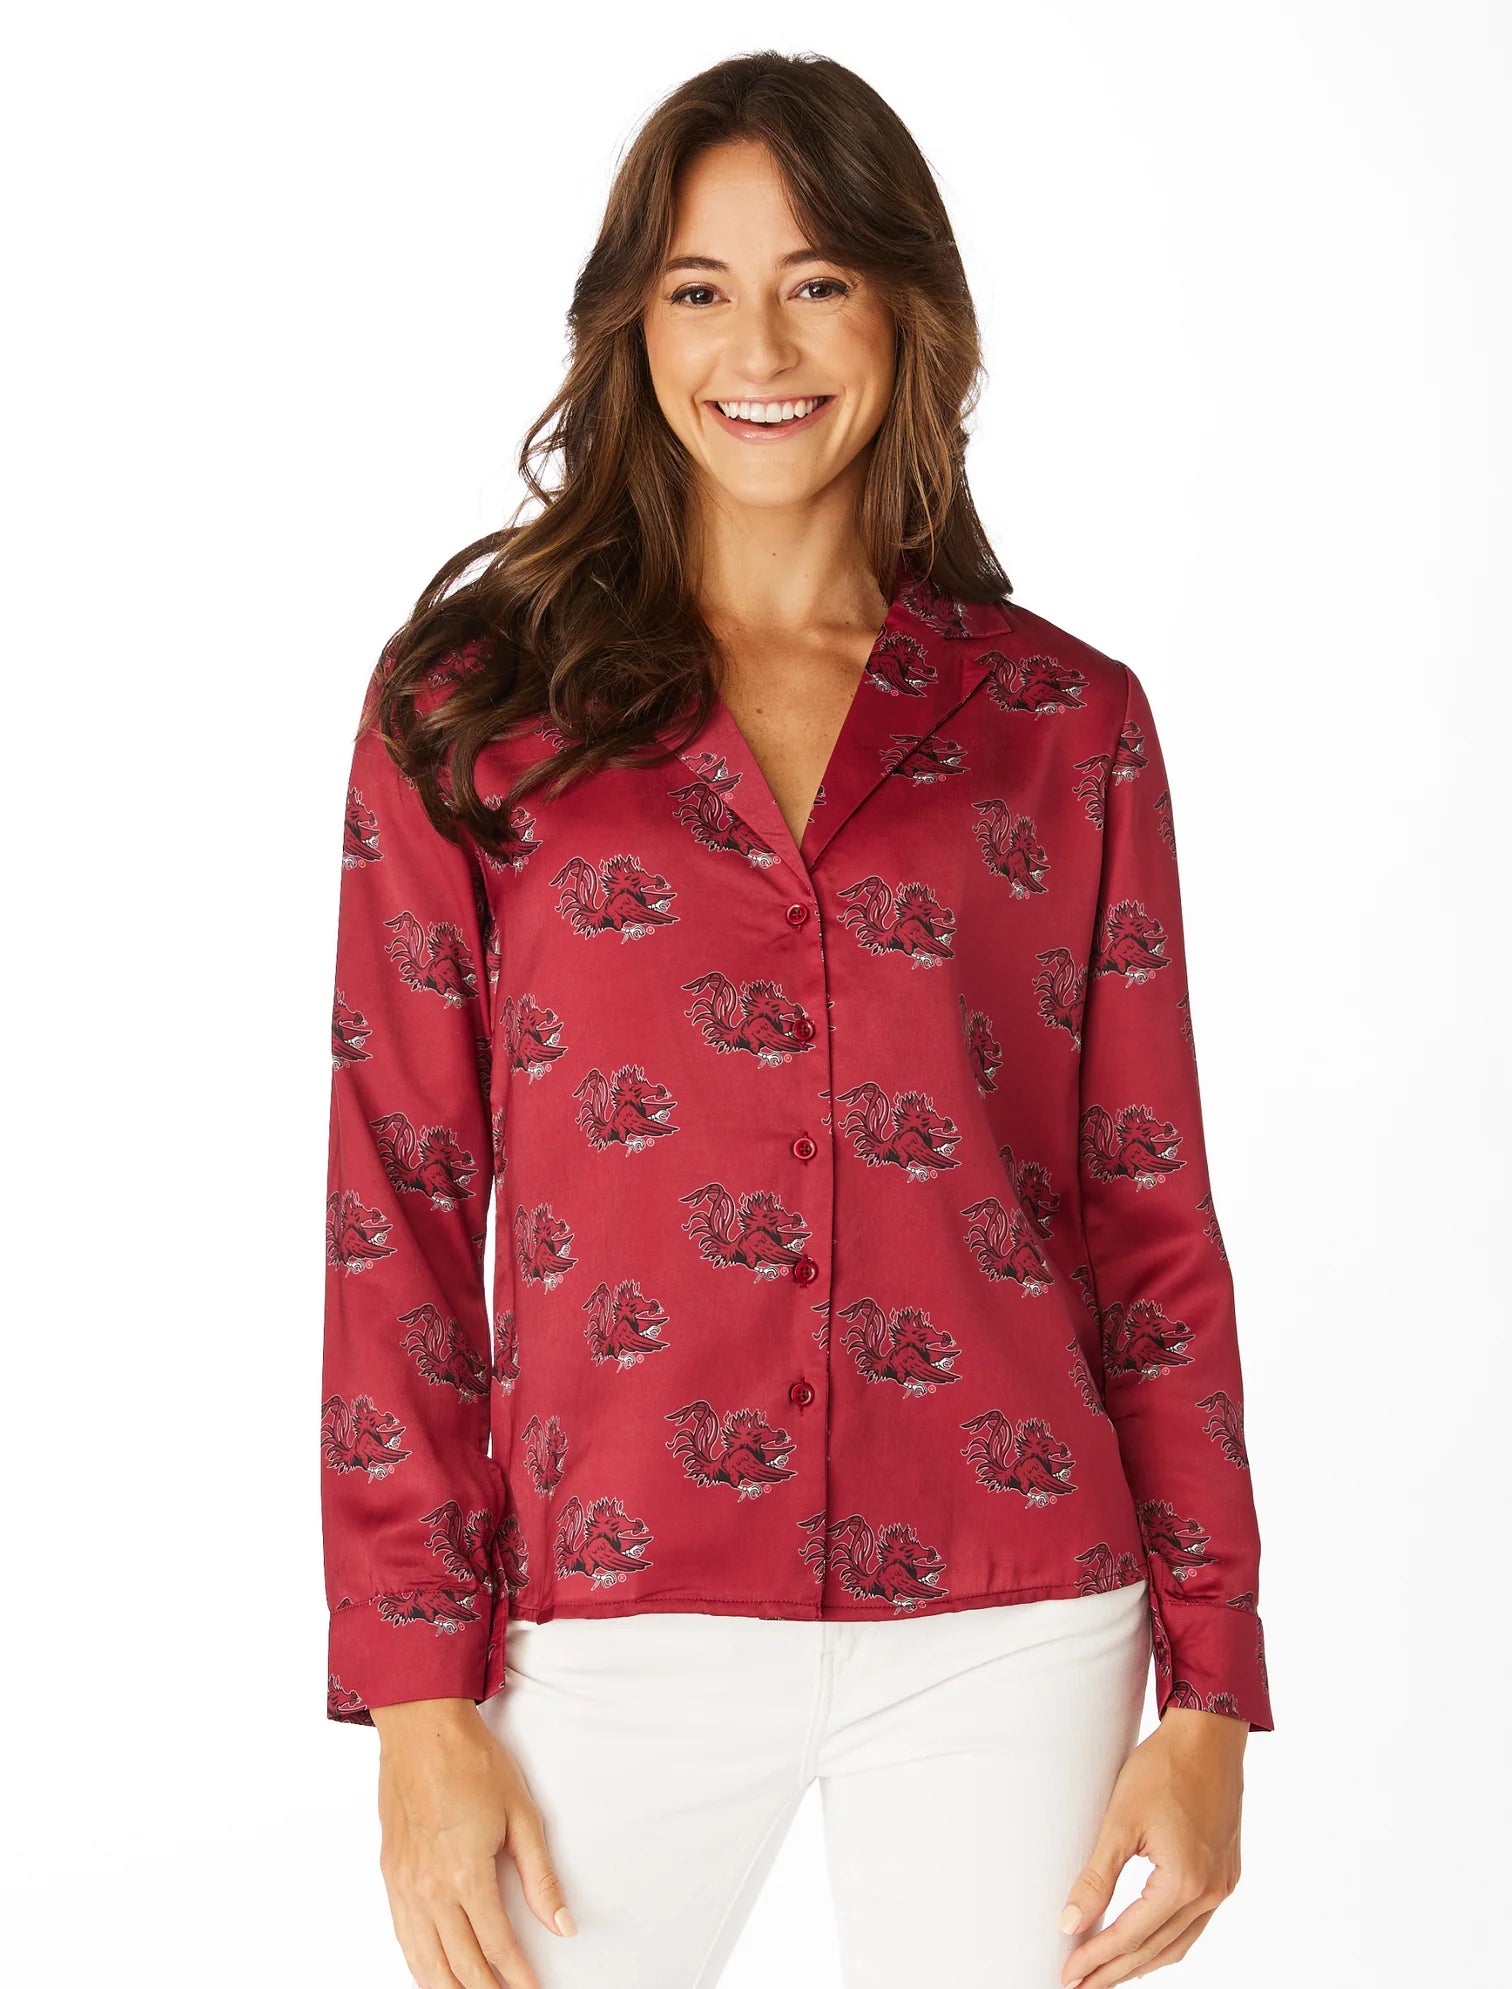 The Gamecock Button Up Long Sleeve - SS